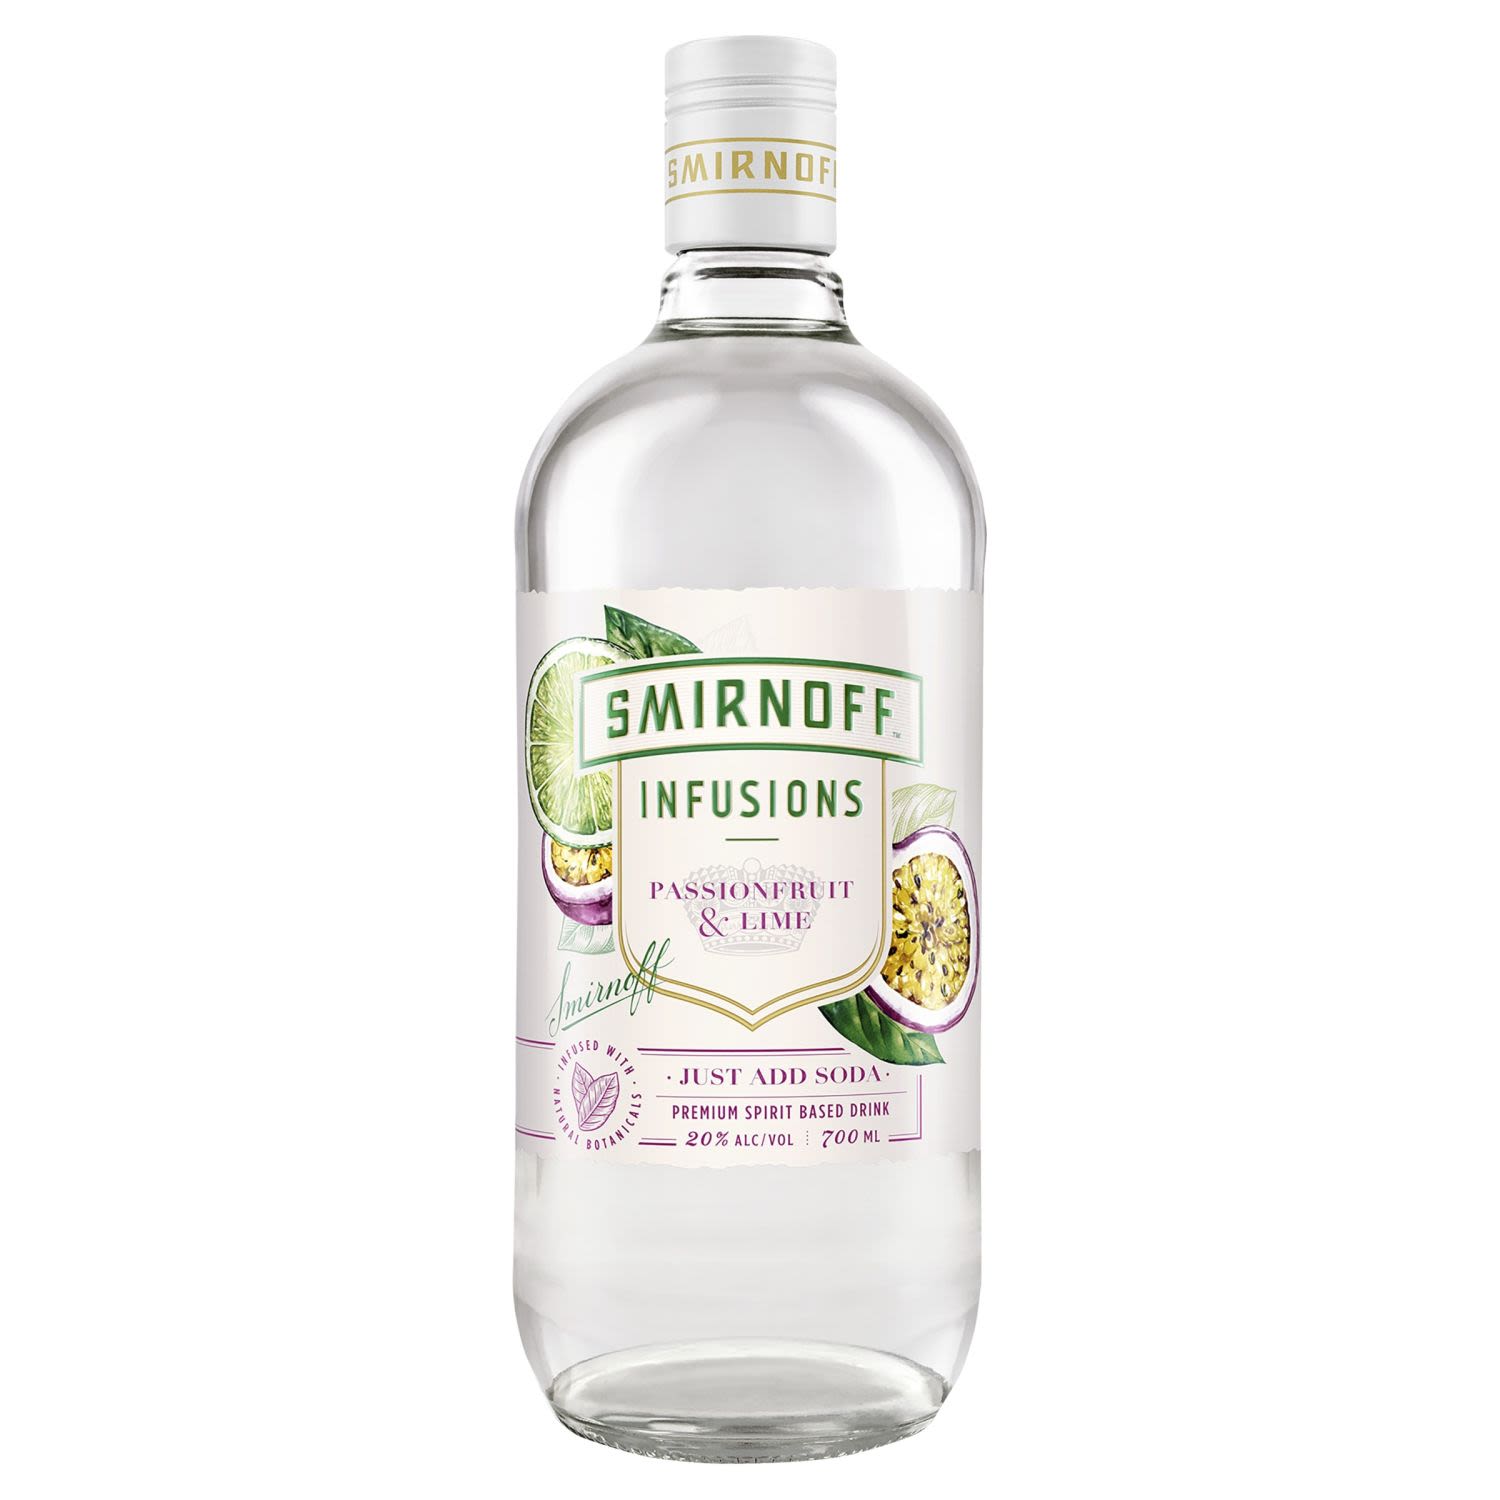 Smirnoff infusions is a lighter spirit infused with natural botanicals for an interesting and clean taste that's easy to mix. Enjoy the flavour of freshly cut passionfruit, with a light zest of lime.<br /> <br />Alcohol Volume: 20.00%<br /><br />Pack Format: Bottle<br /><br />Standard Drinks: 11</br /><br />Pack Type: Bottle<br /><br />Country of Origin: Australia<br />